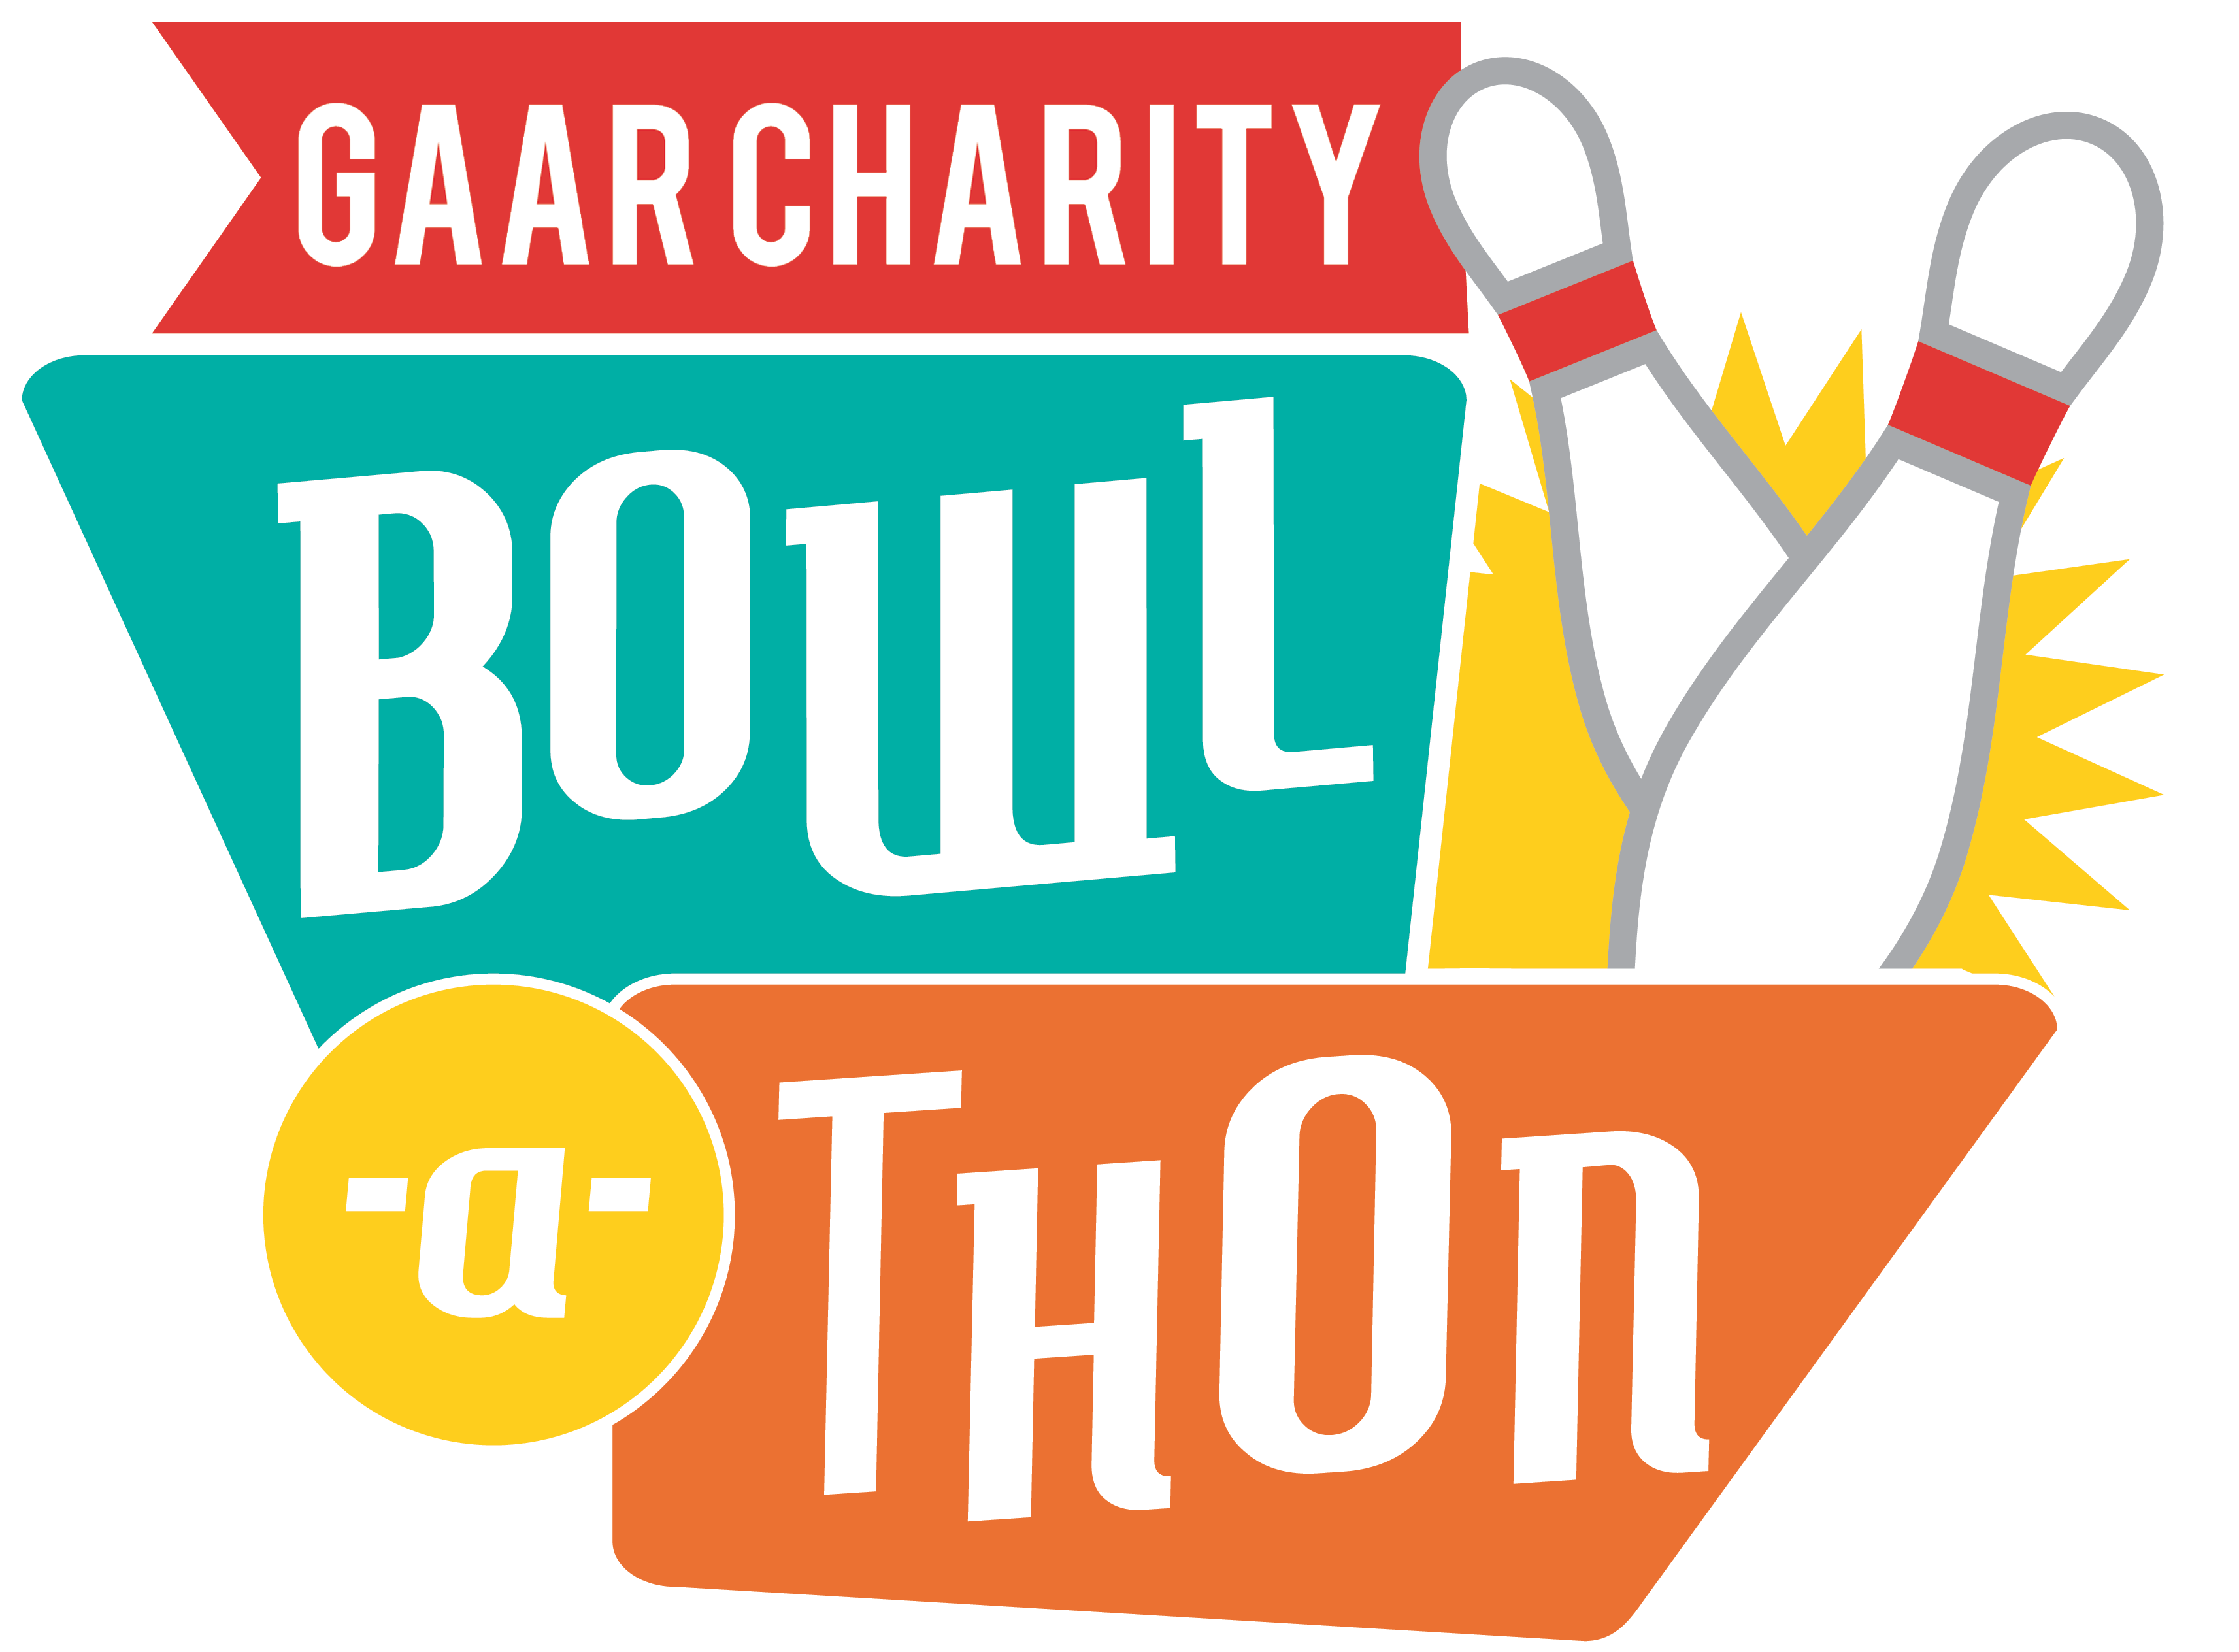 LAST CHANCE to register for Bowl-a-Thon on Saturday, October 15th